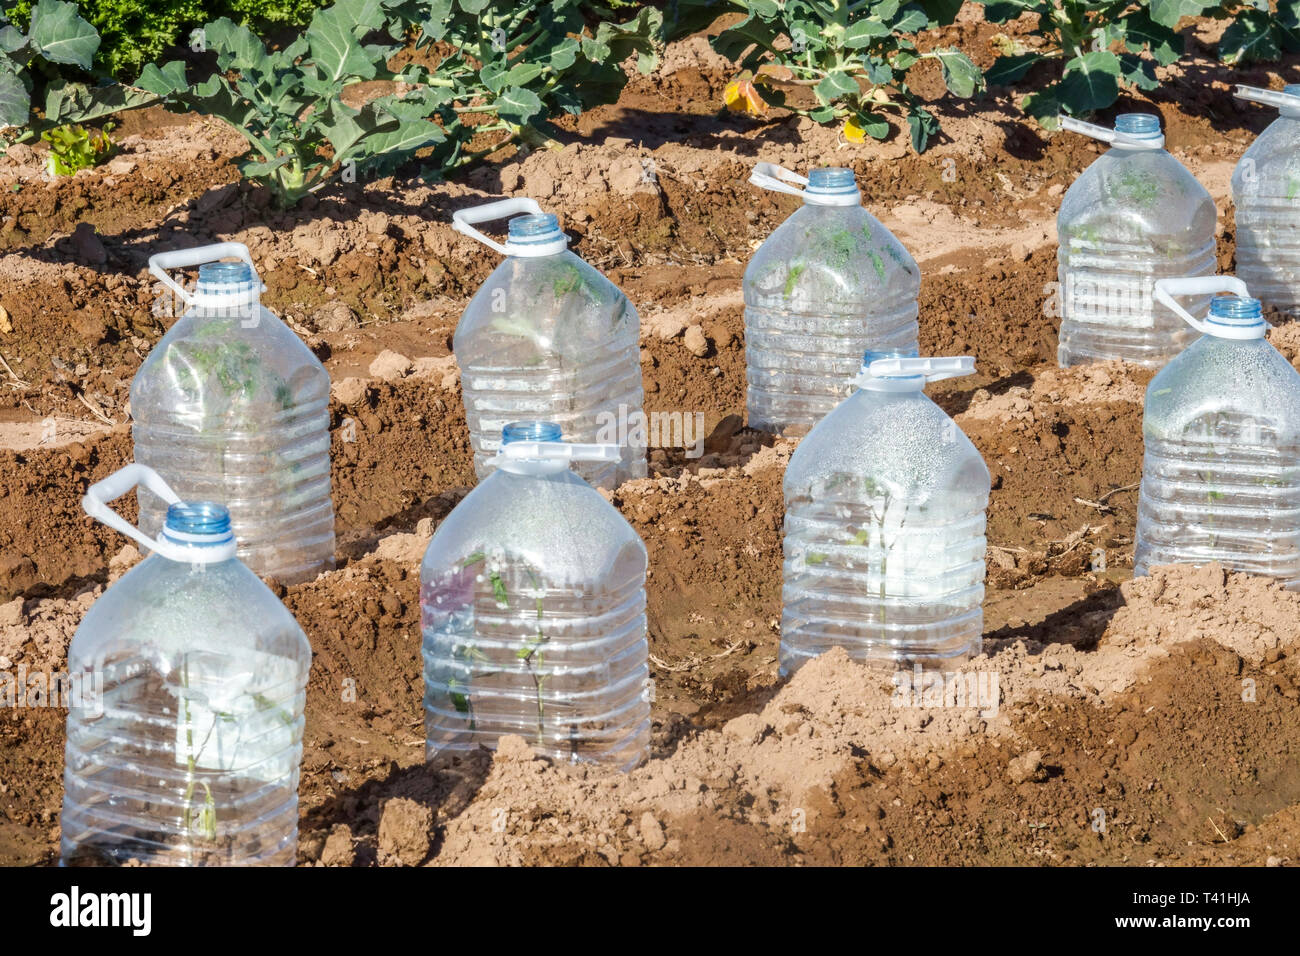 Plastic bottles used to protect growing crops at an allotment garden, Valencia Spain Stock Photo